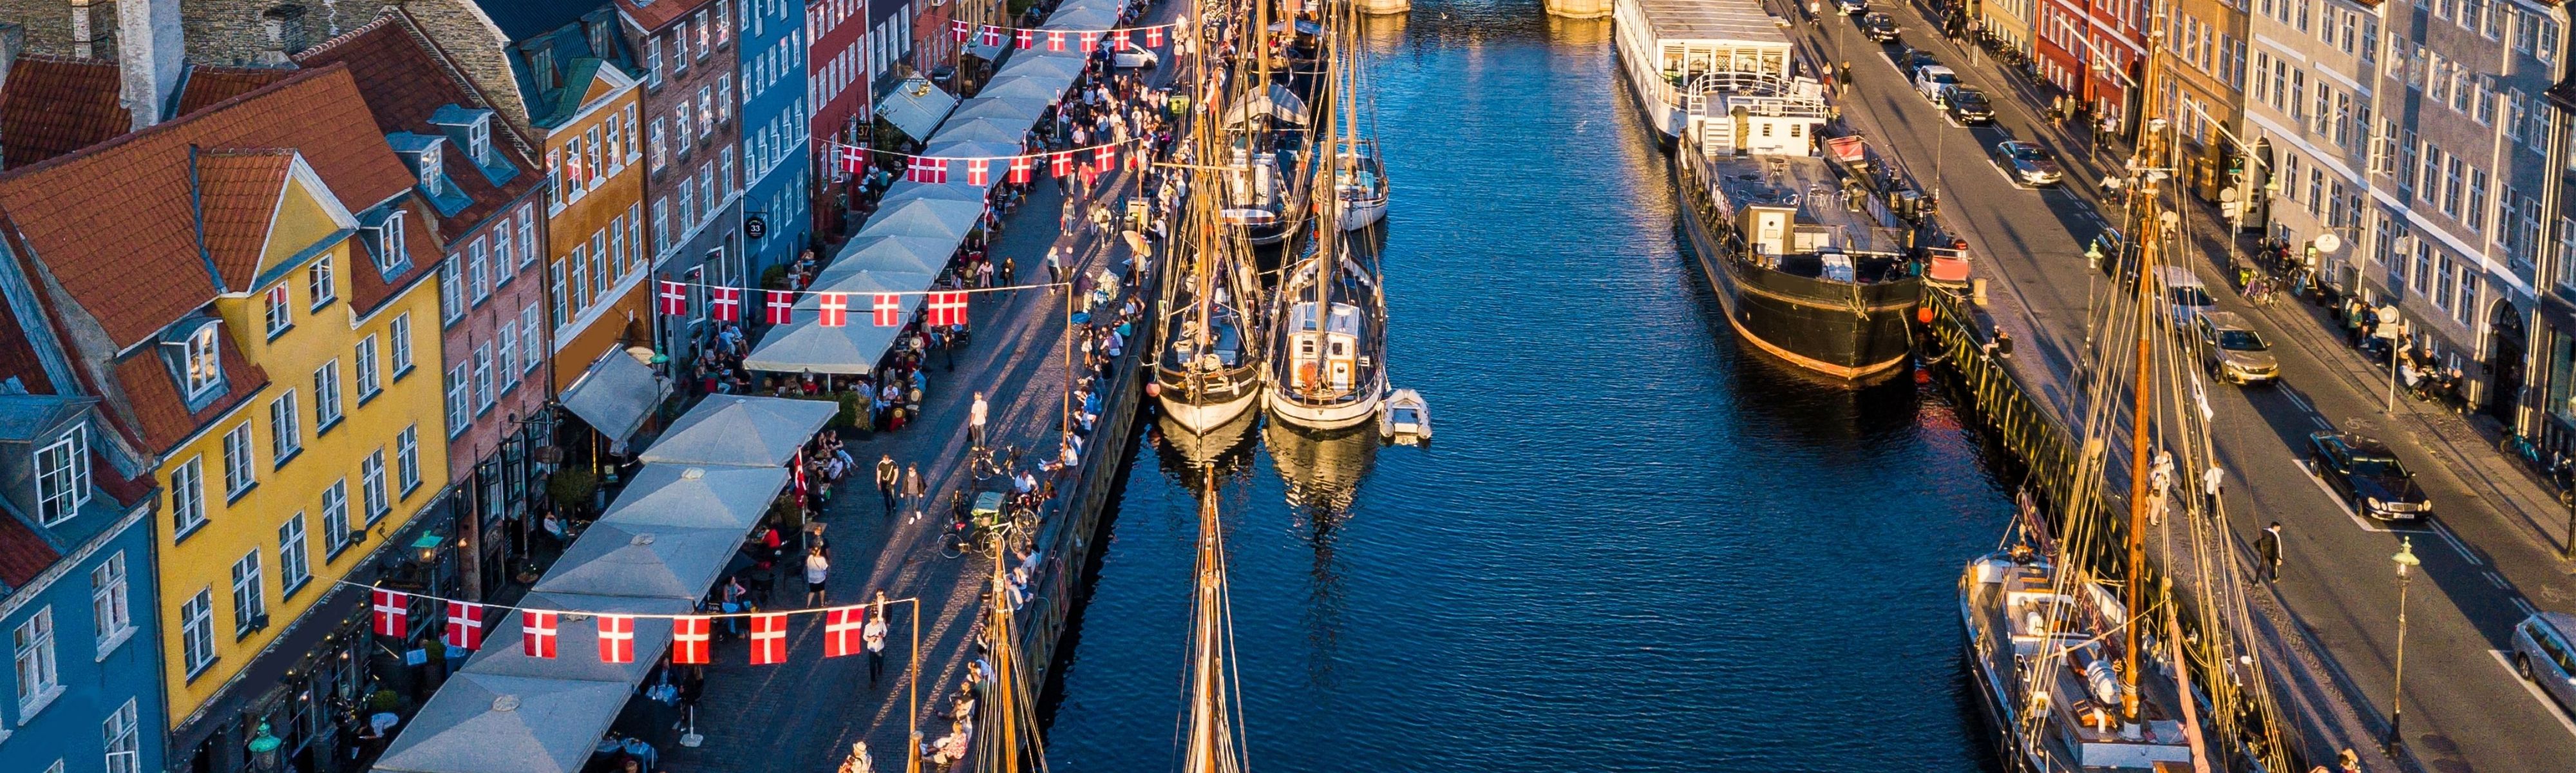 looking down at boats docked in new harbour canal in denmark